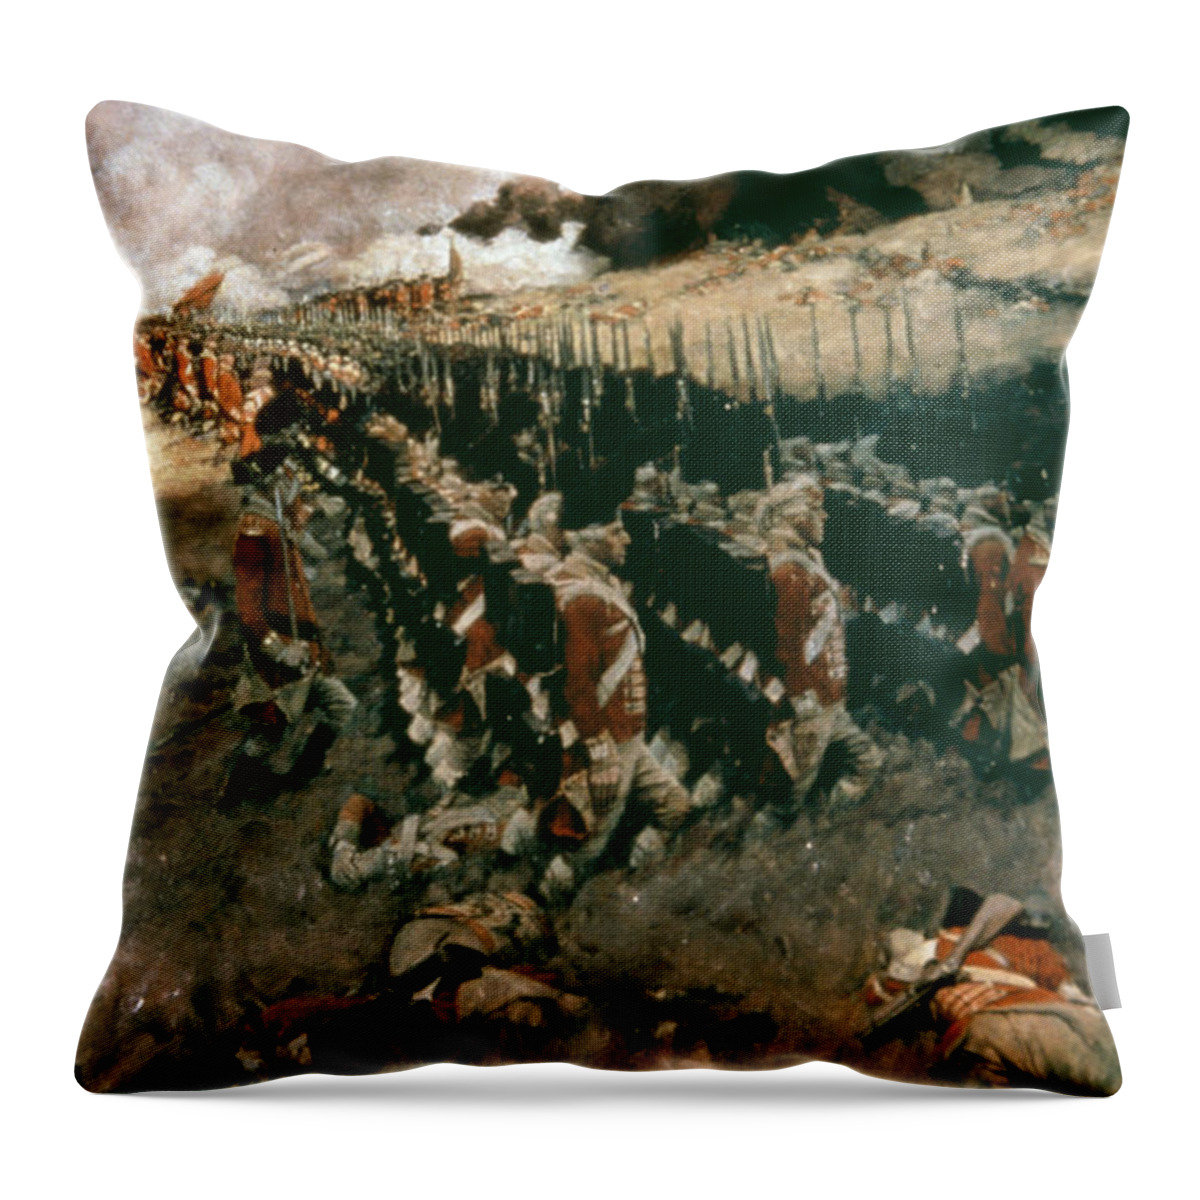 1775 Throw Pillow featuring the painting Battle Of Bunker Hill by Howard Pyle